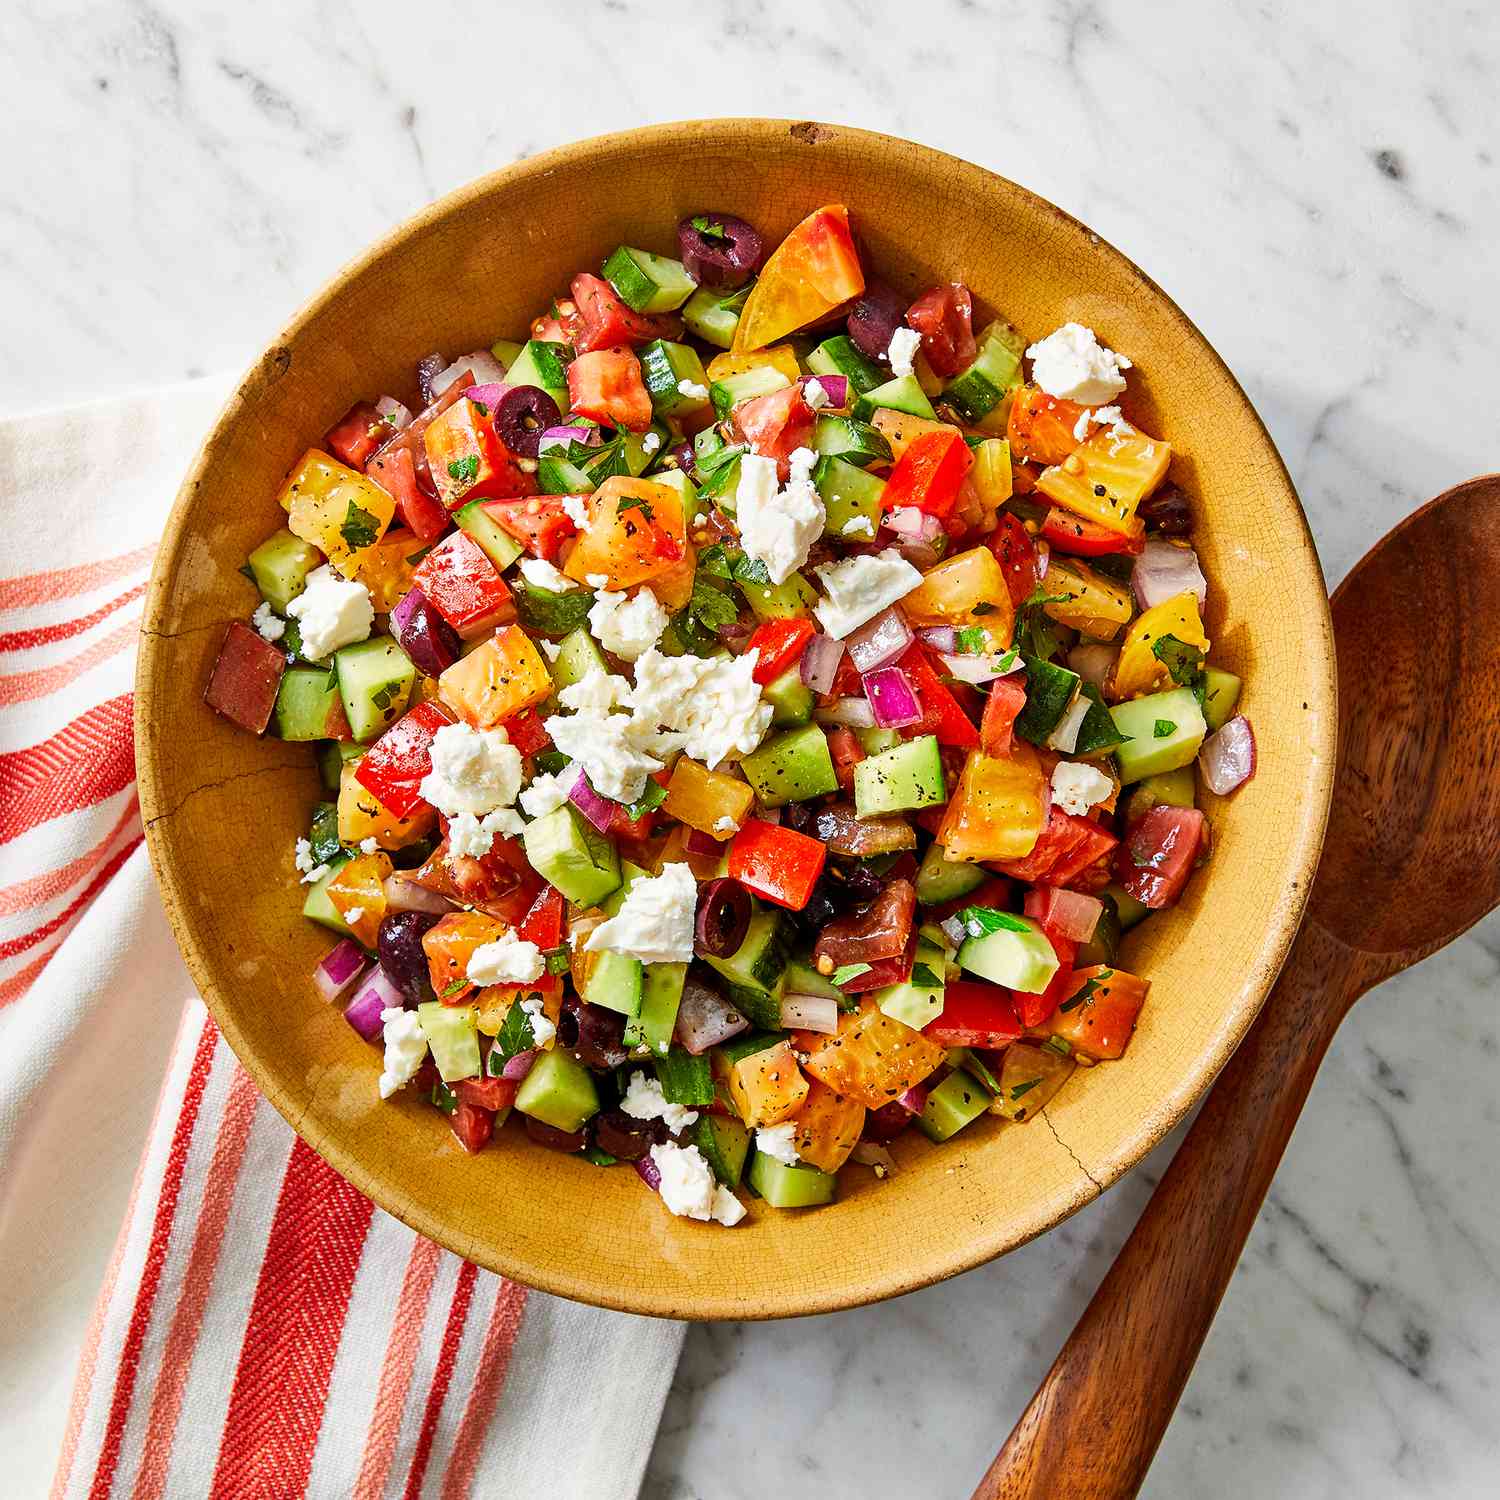 Use-a-Spoon Chopped Salad with Tomatoes, Cucumber, Red Onion & Kalamata Olives